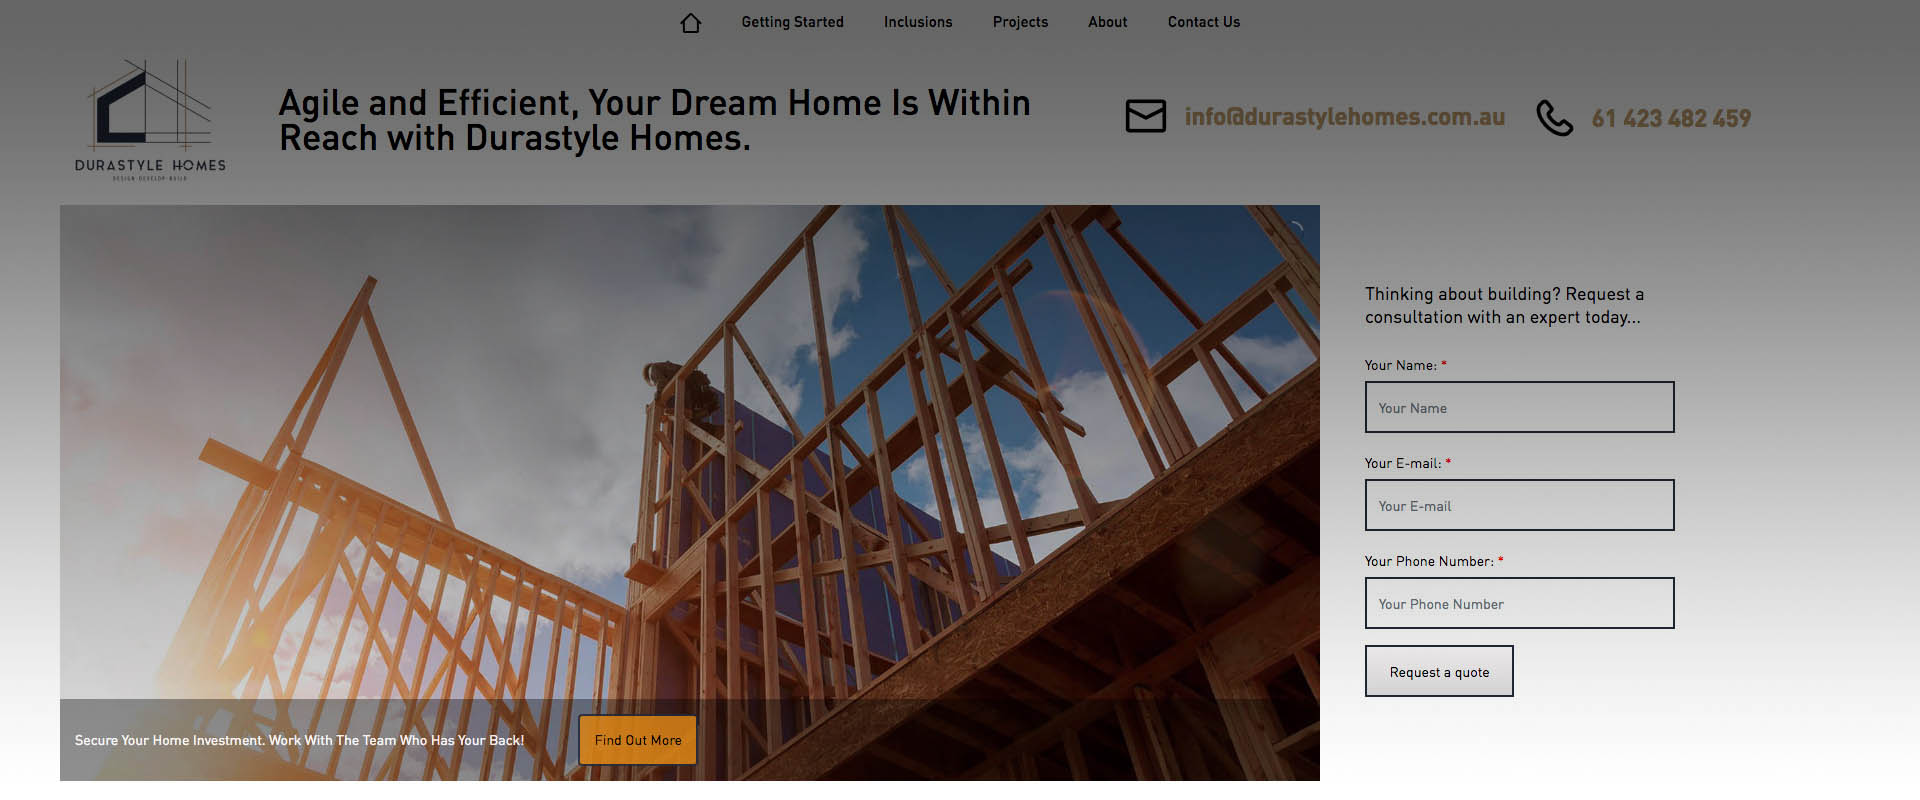 Durastyle Homes